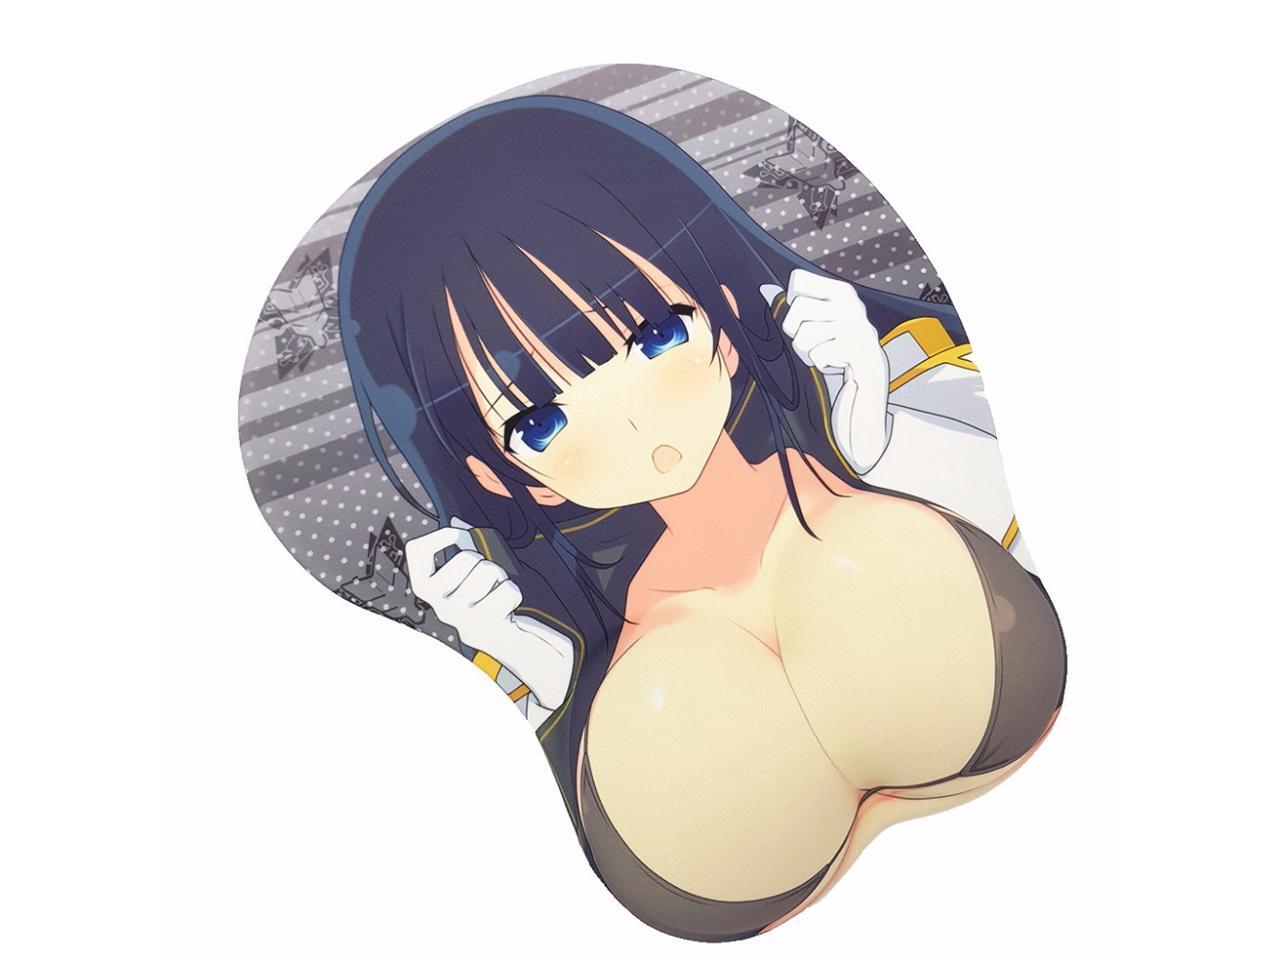 Anime tit mouse pad - 🧡 44 tidy tantalizing Tuesday memes - Gallery eBaum&...